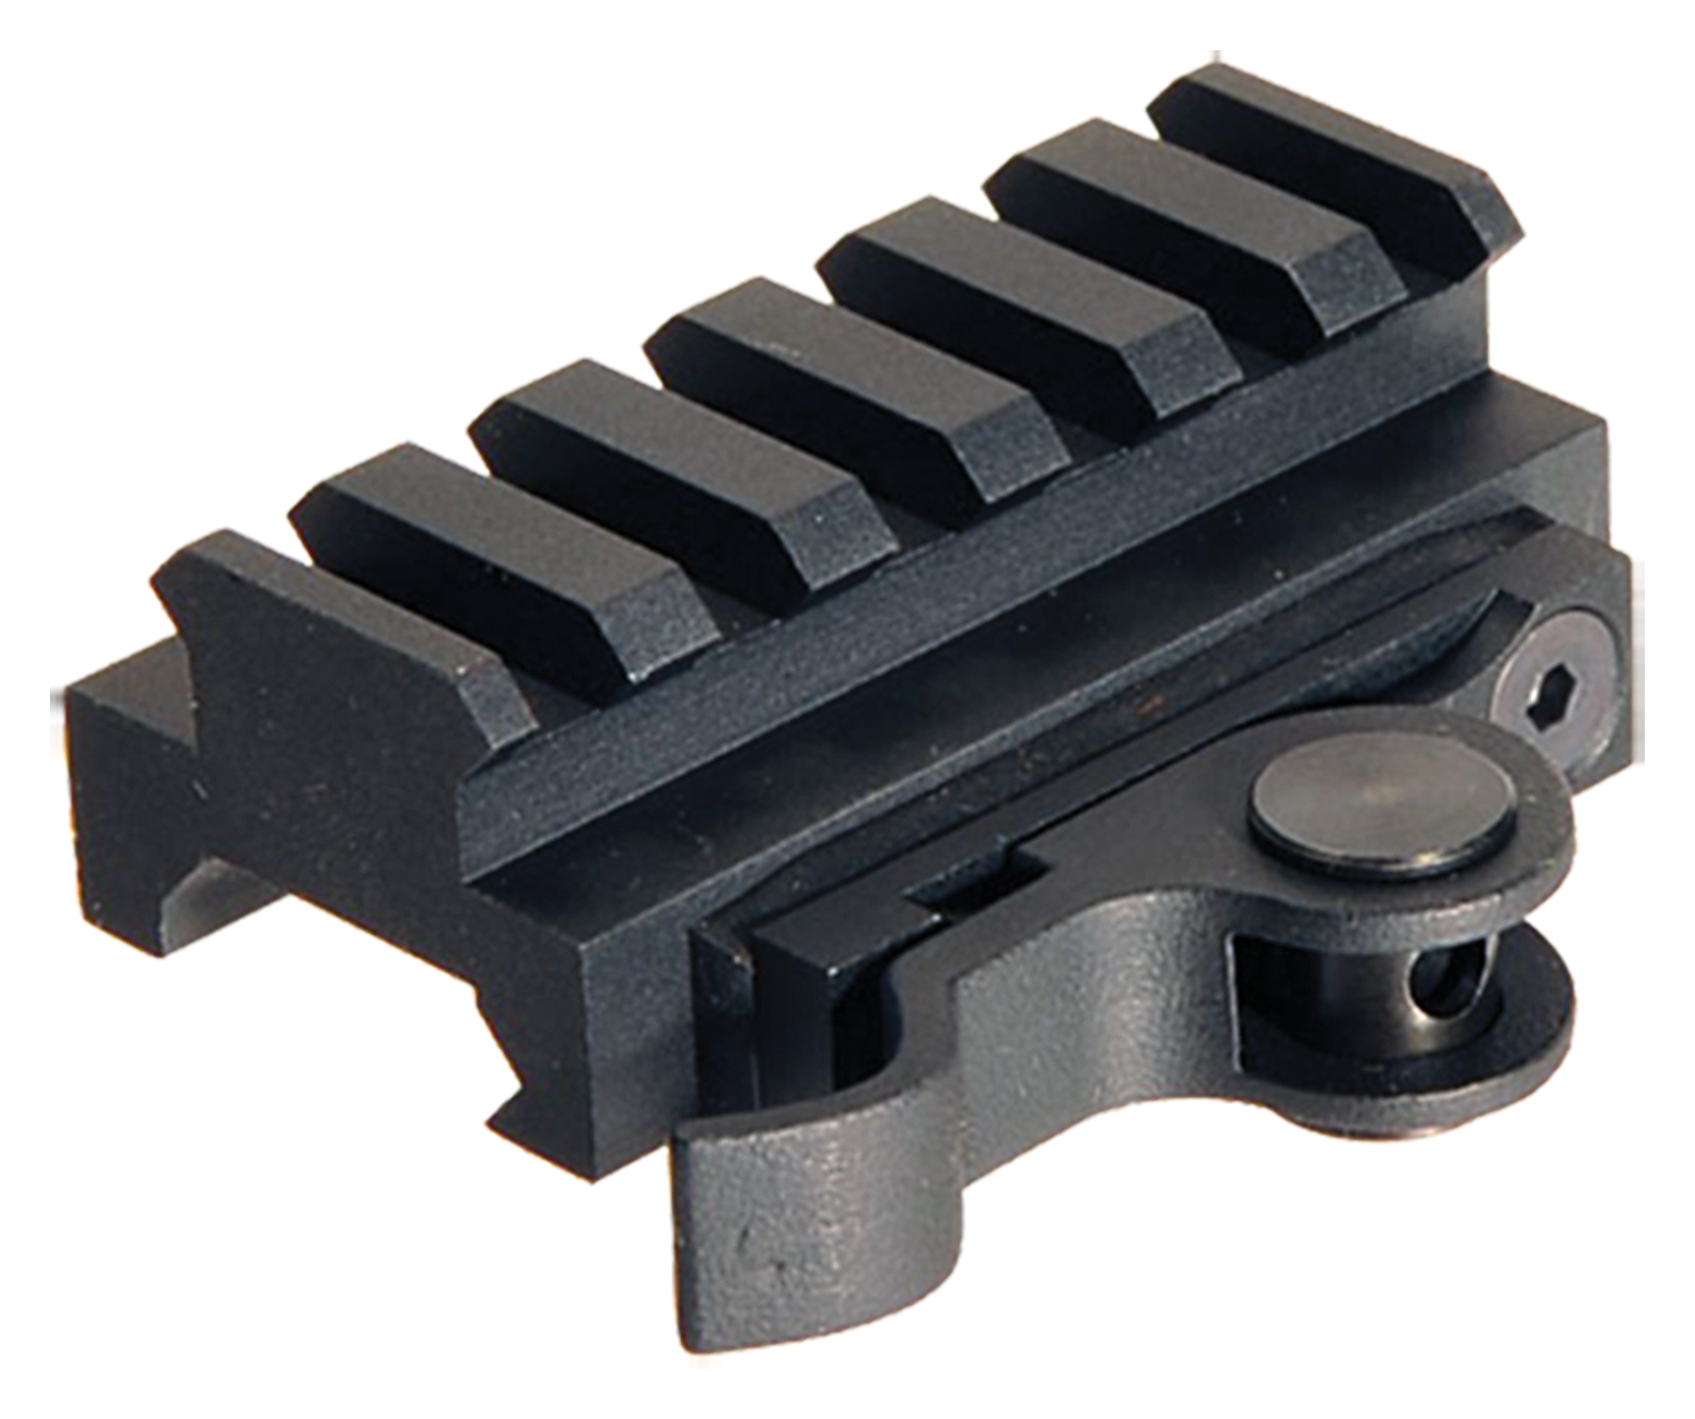 AimSHOT Quick-Release Rail Mount Adapter